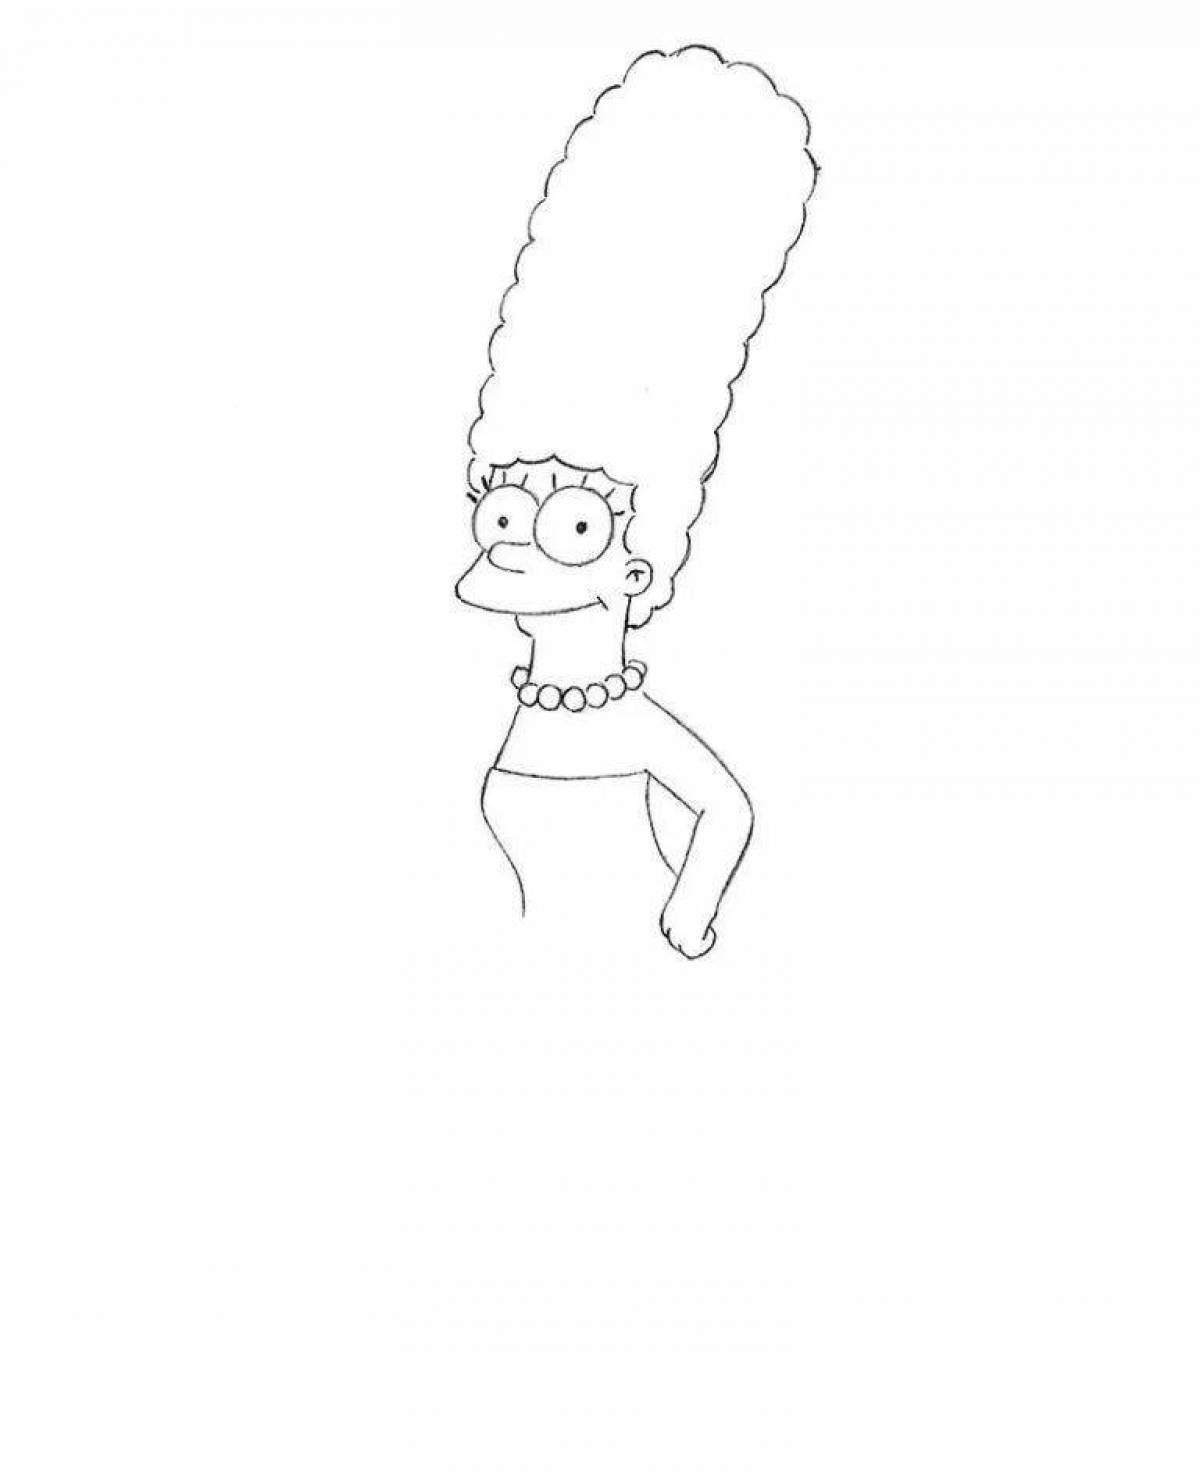 Marge simpson freaky coloring book